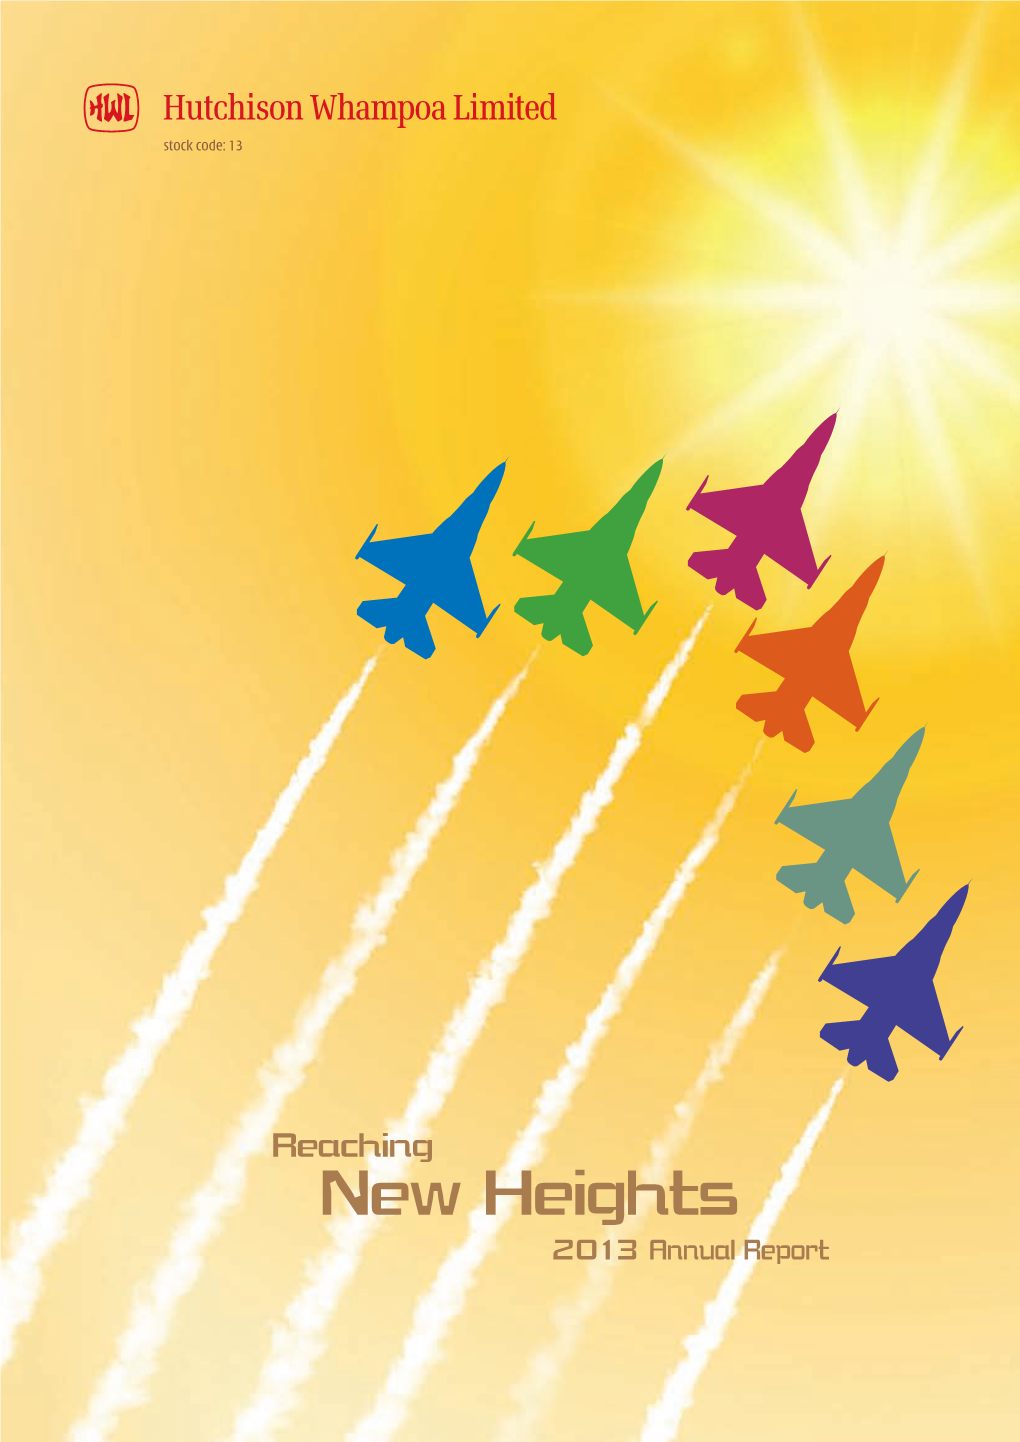 New Heights 2 013 Annual Report Worldreginfo - 8Fce6c9d-47Ca-4227-Bd87-1Ab639a60ad8 Corporate Information